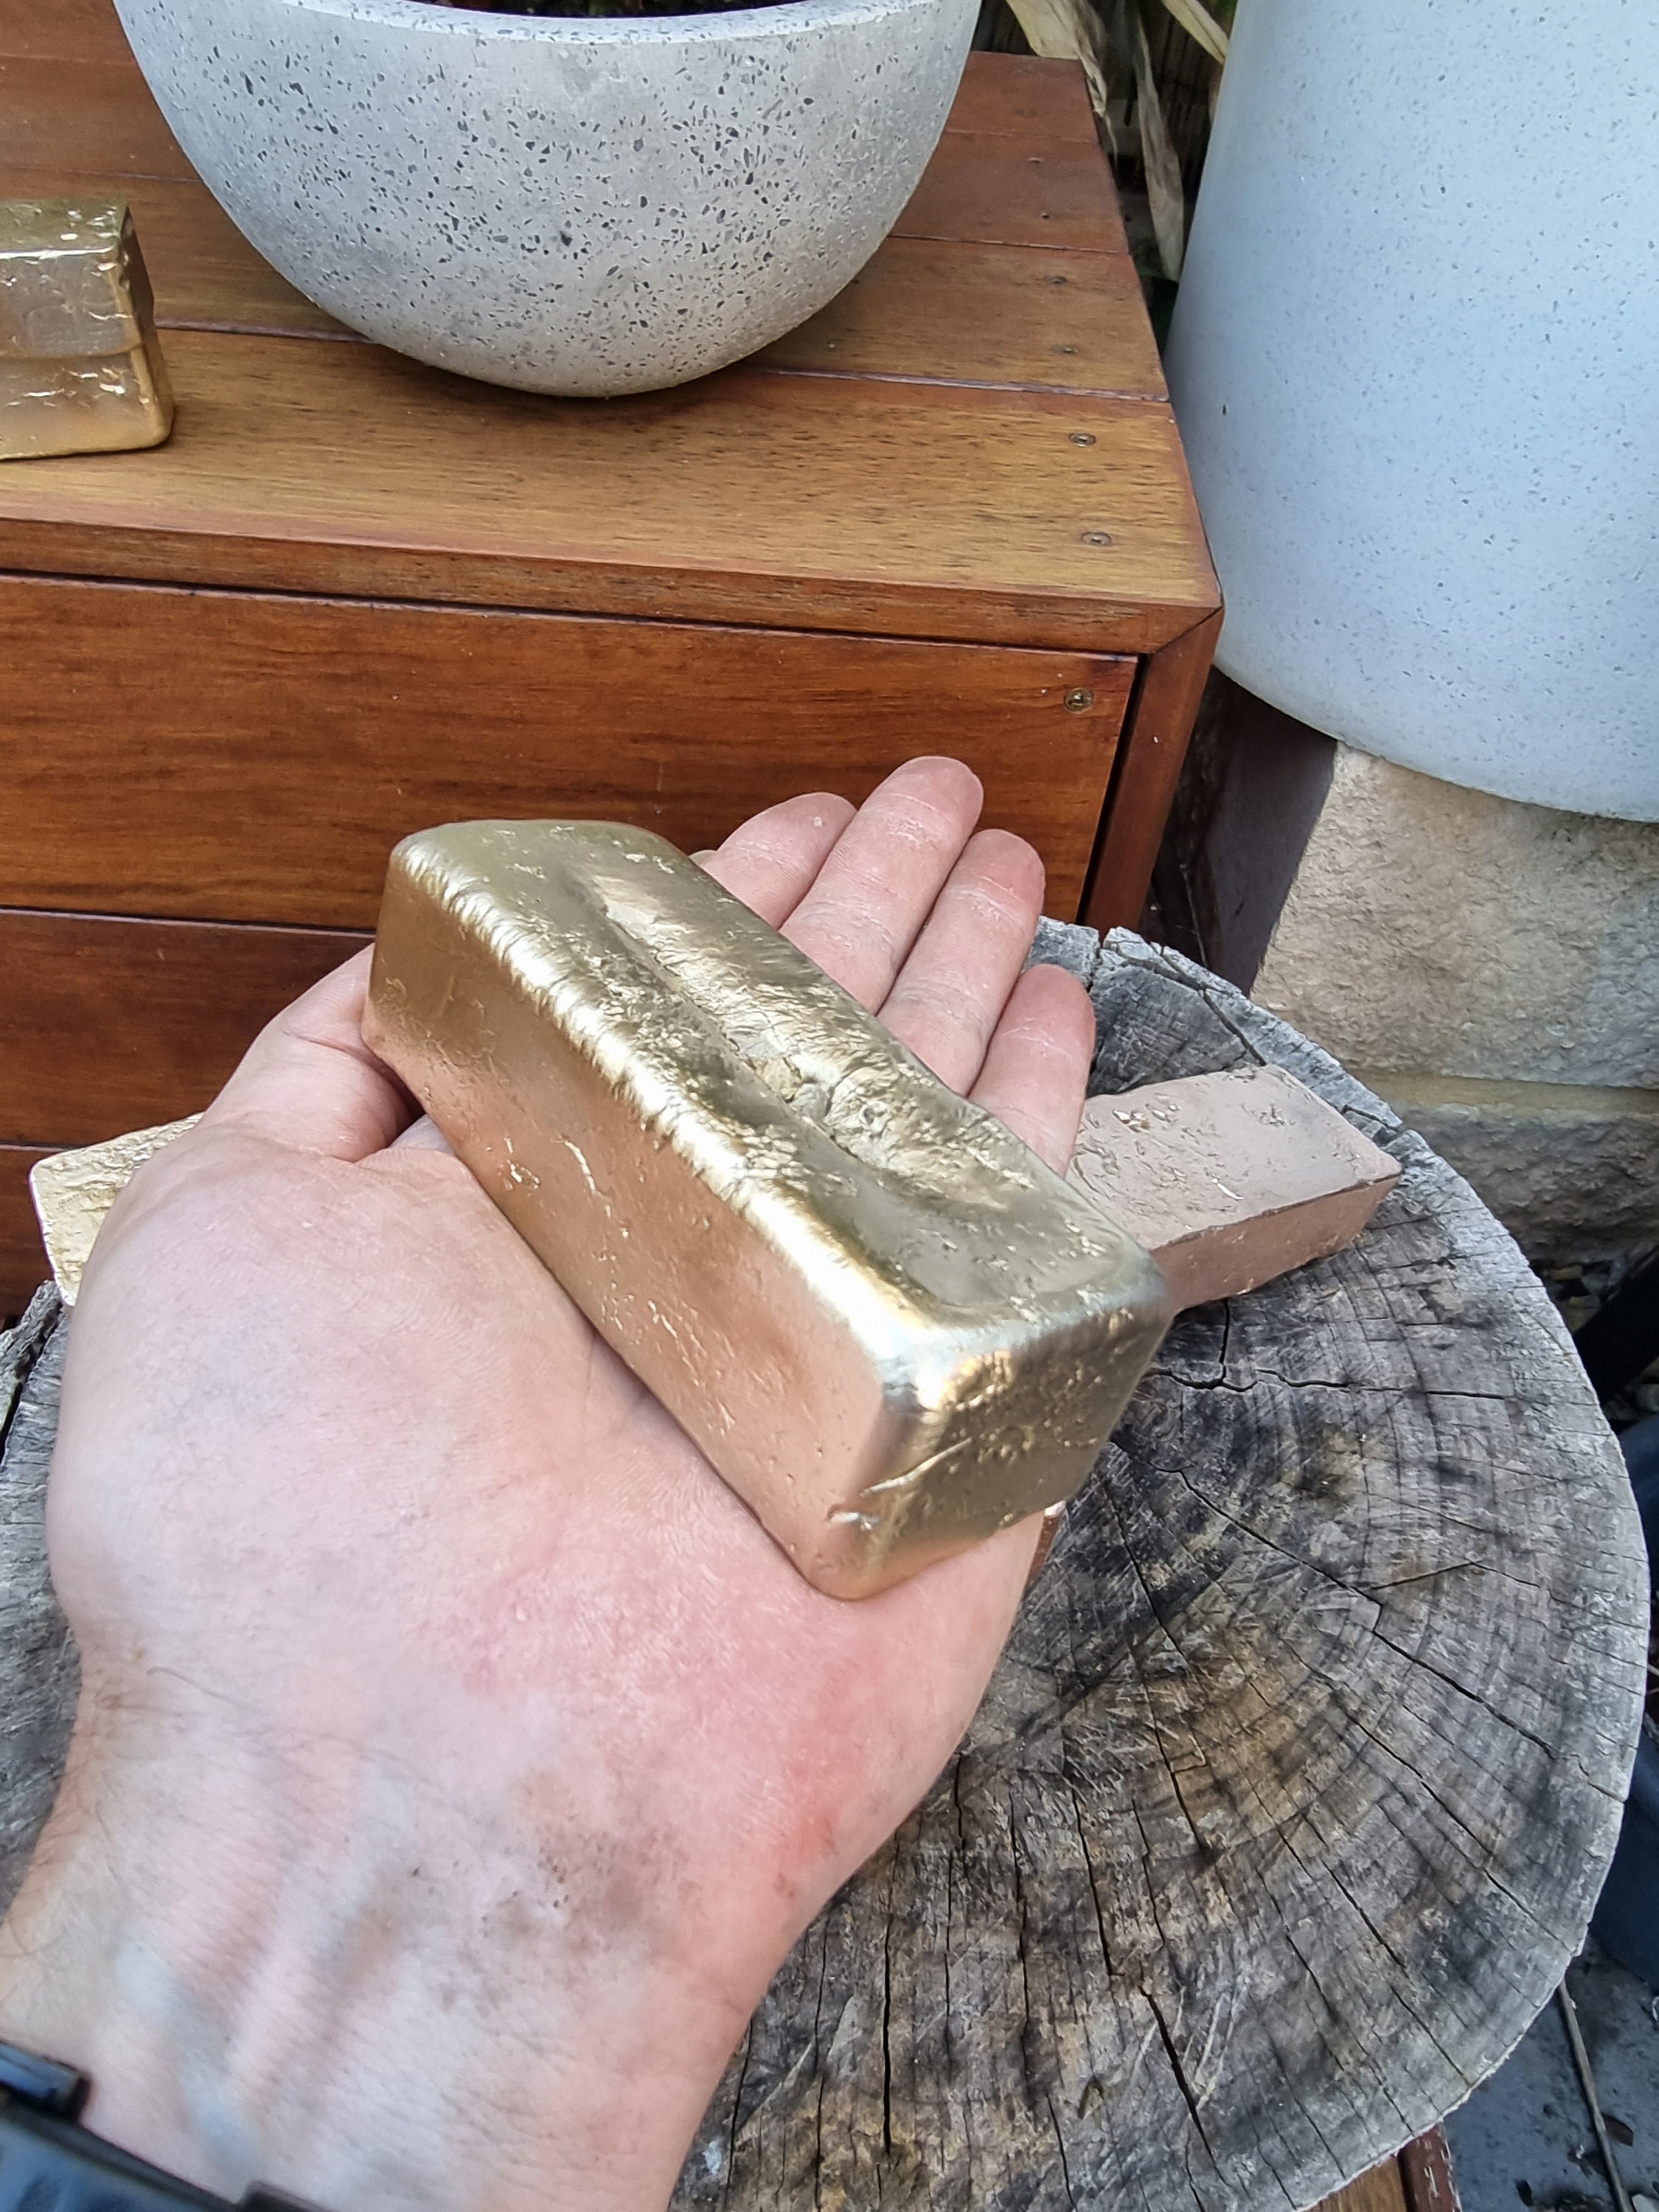 Handmade 1kg 2.2lbs High Purity Stamped Copper Ingots 